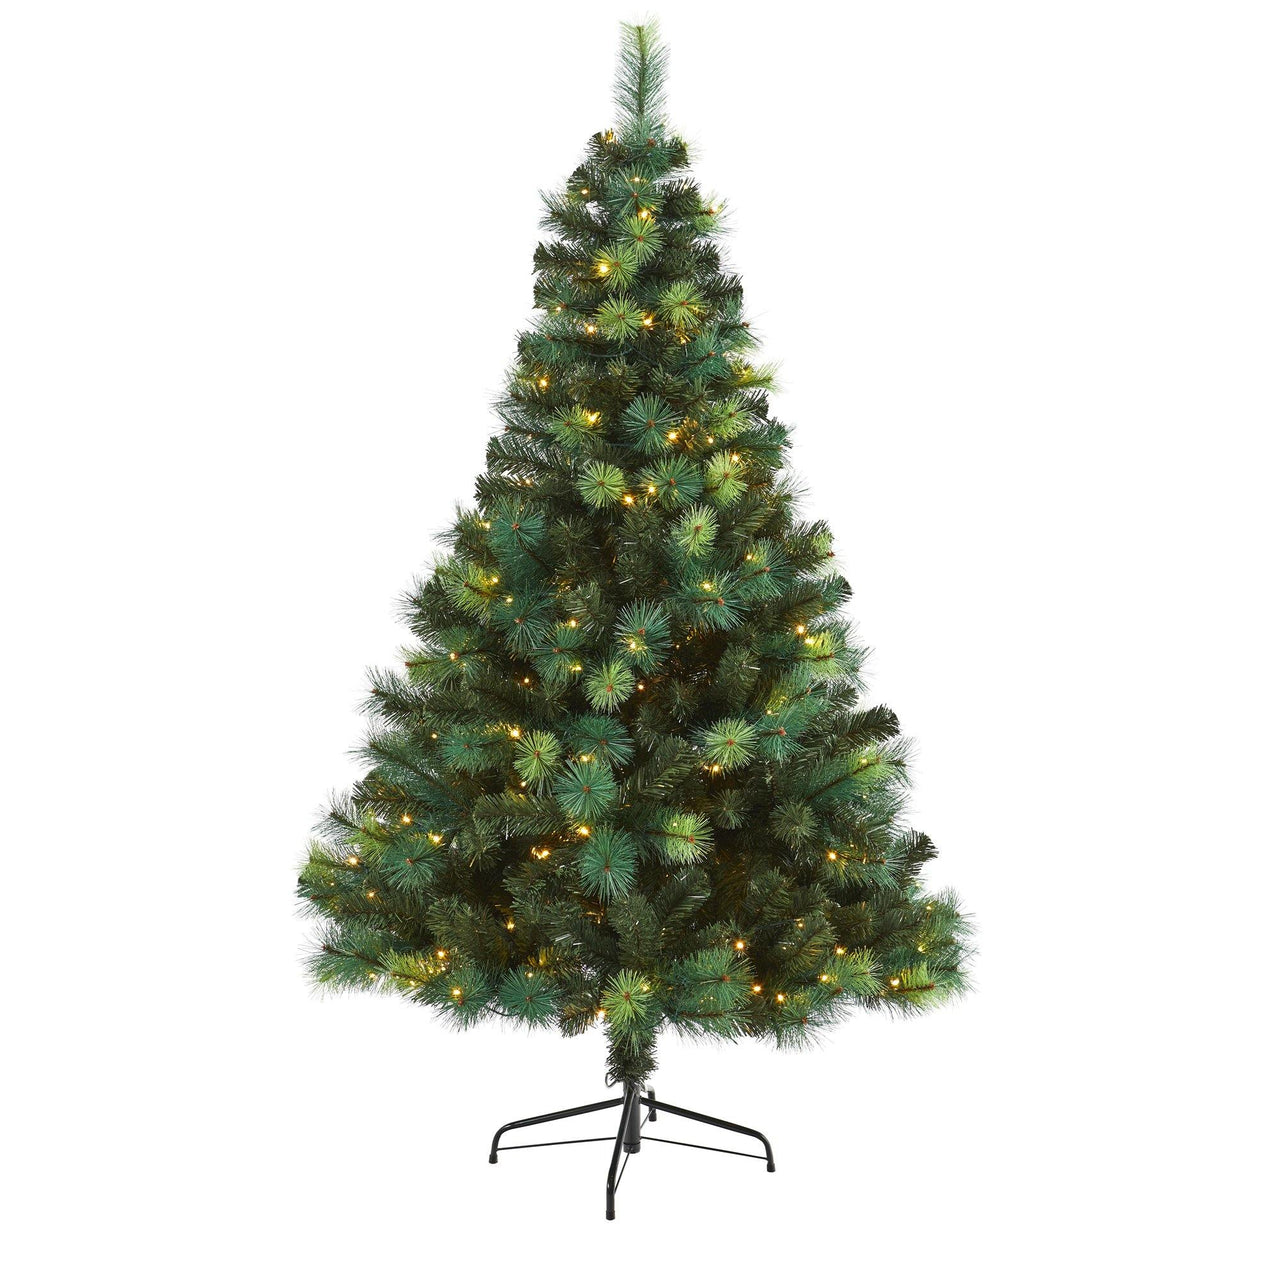 6' Assorted Green Scotch Pine Artificial Christmas Tree with 250 LED Lights